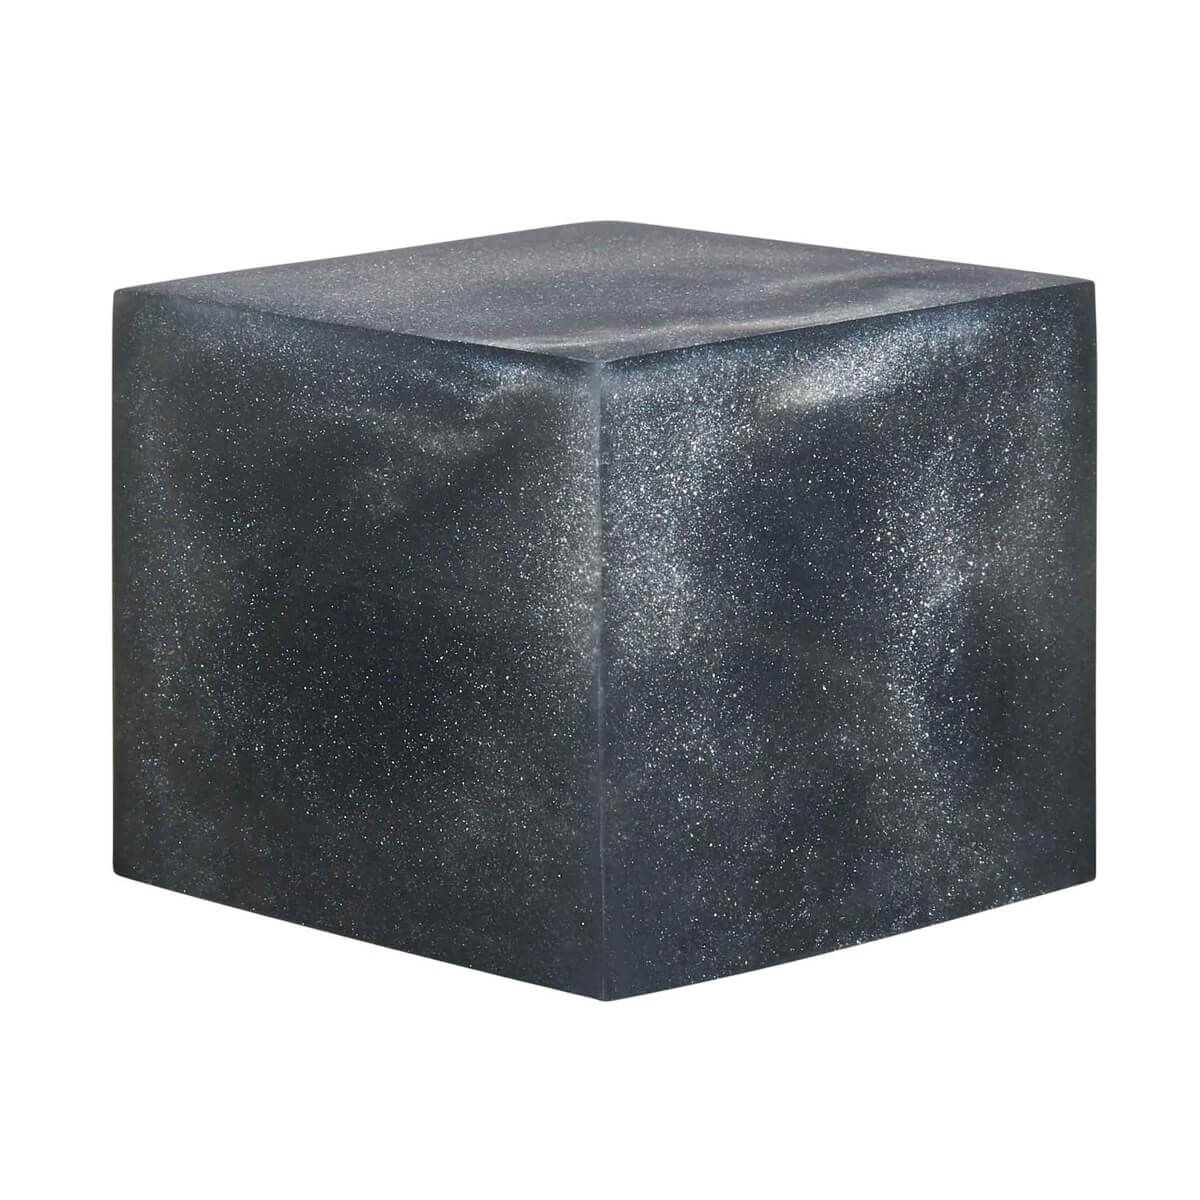 A resin cube made with Asphalt Magic Mica Powder Pigment by Pigmently